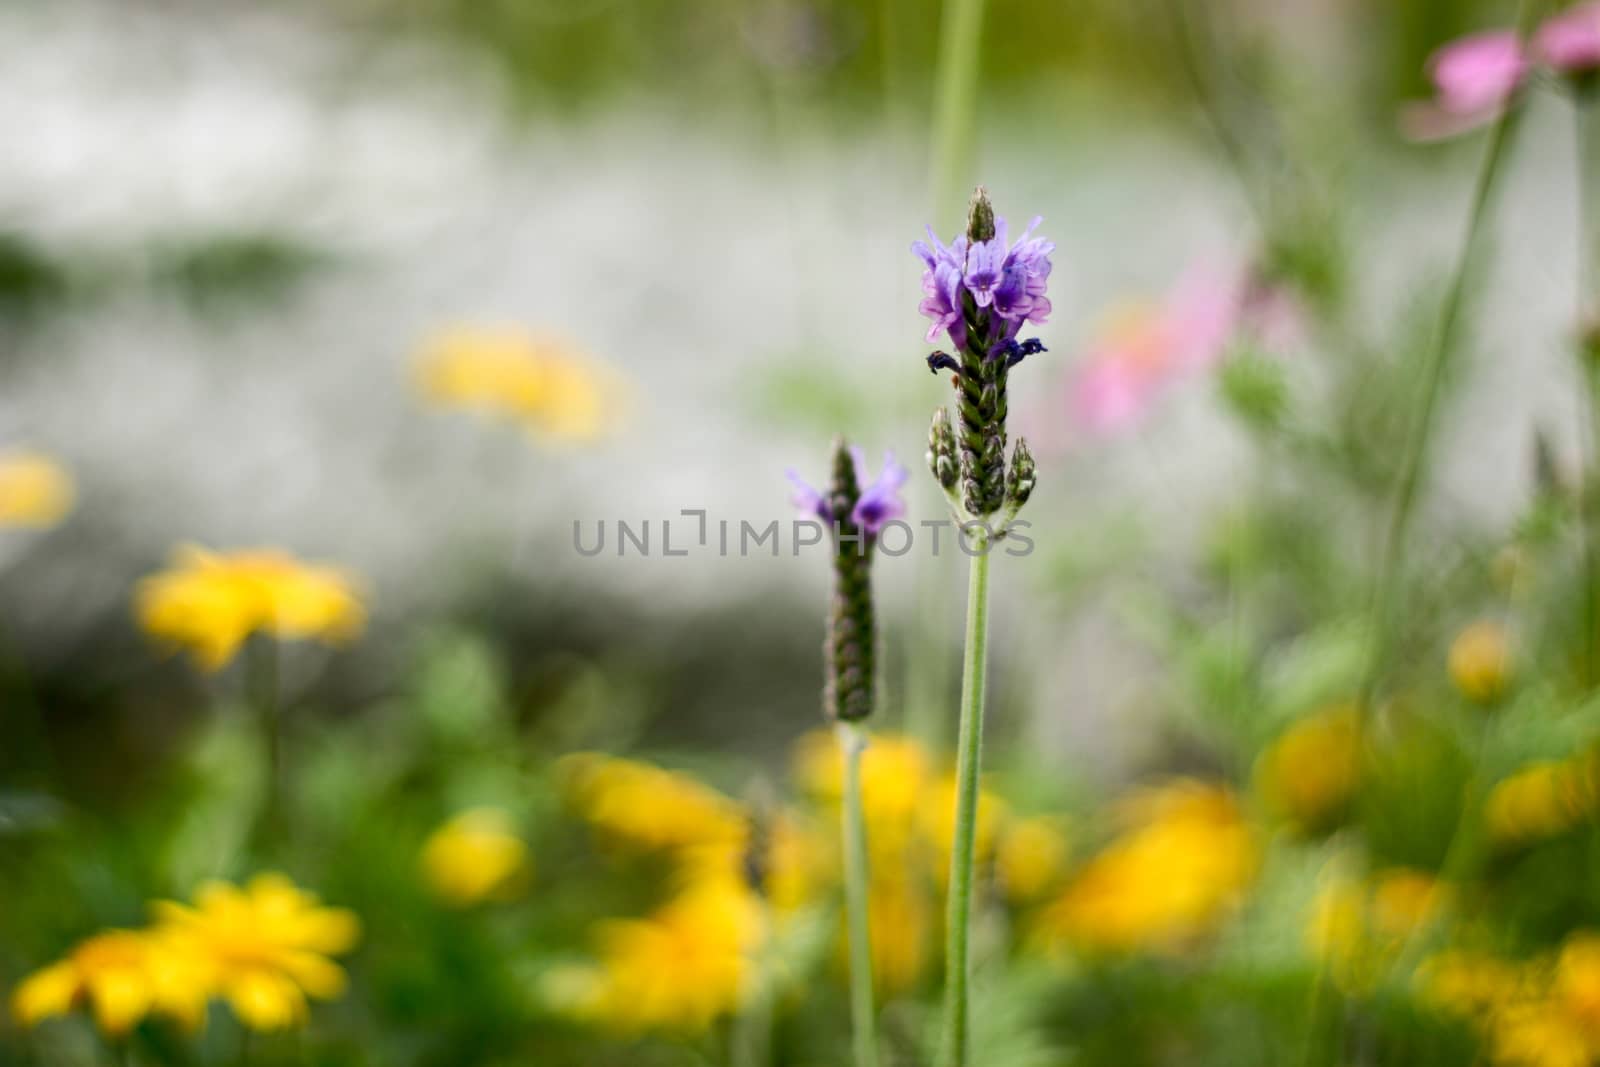 Lavender with leaves and blur background